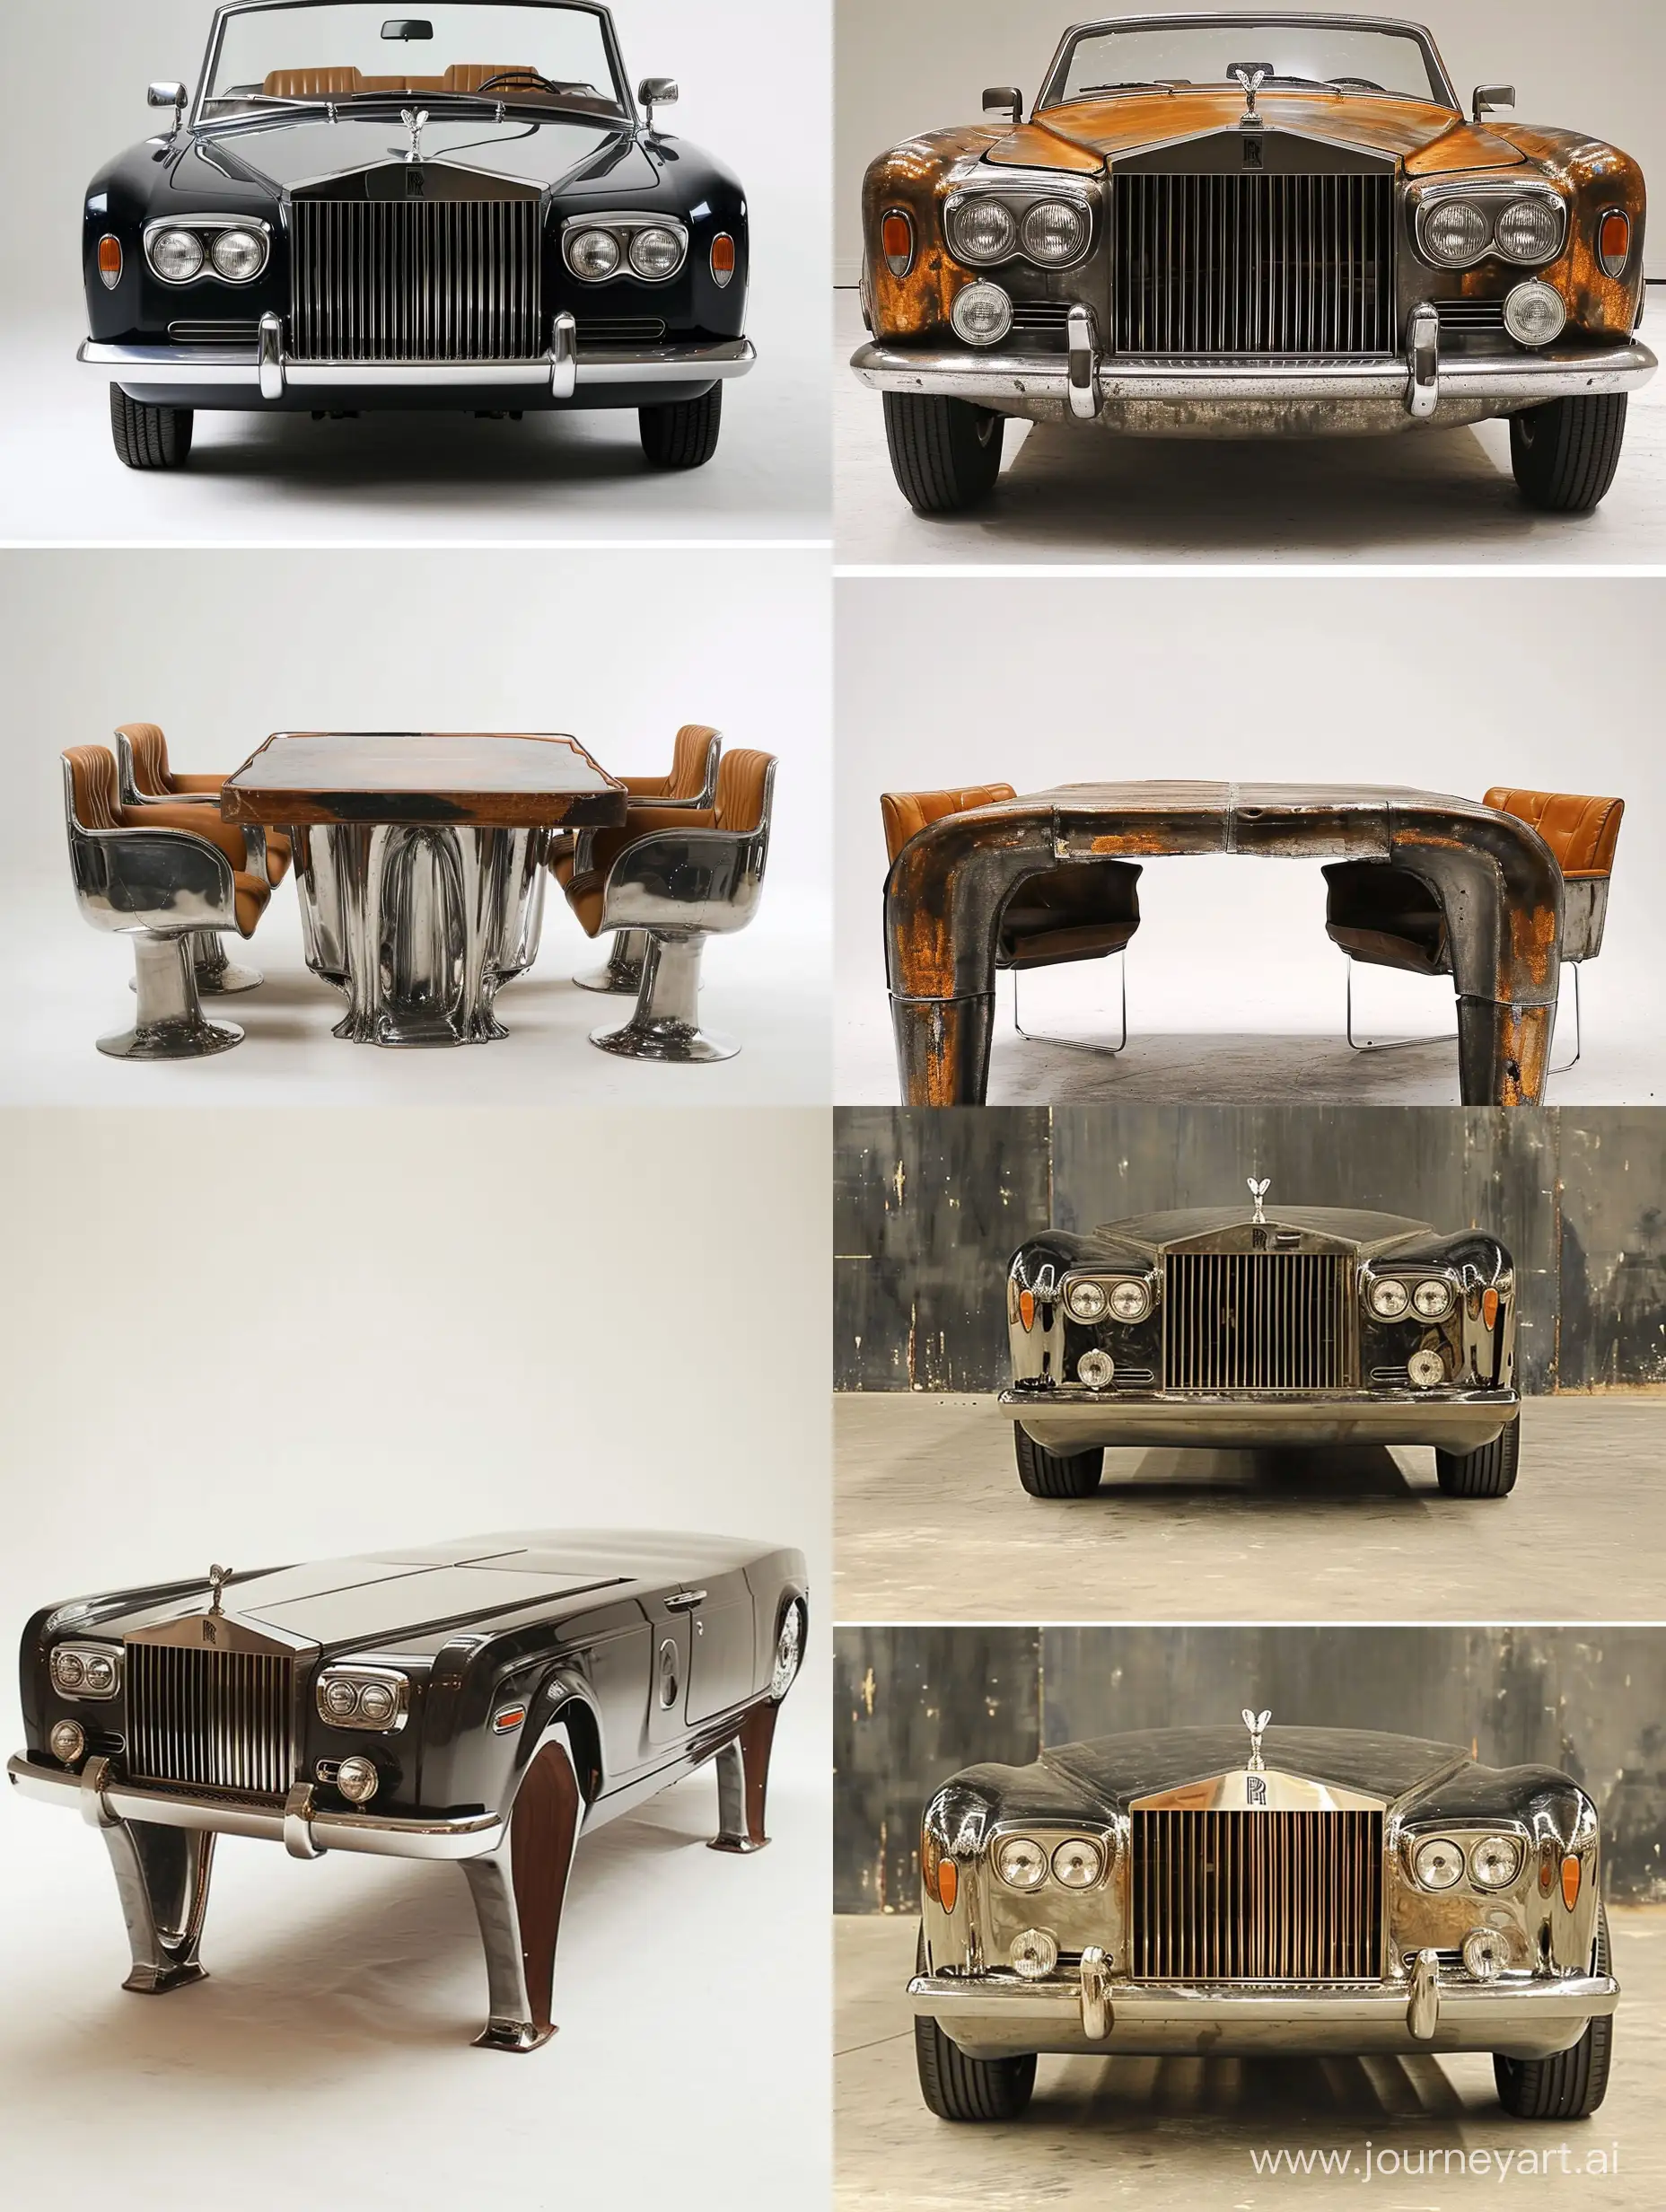 A dining table made out of a repurposed Rolls Royce.